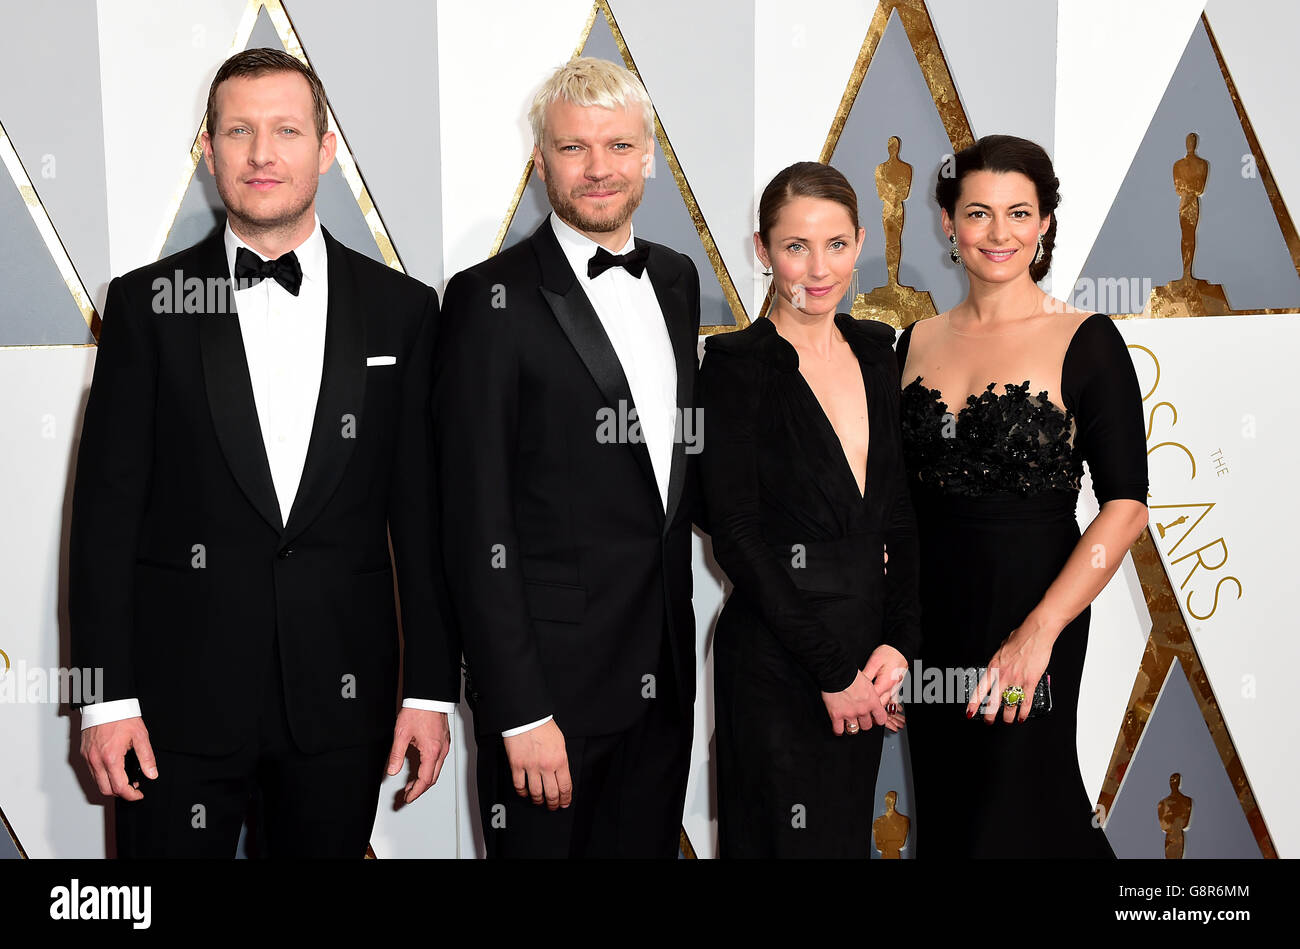 Tobias Lindholm, Pilou Asbaek, Tuva Novotny and Caroline Blanco arriving at the 88th Academy Awards held at the Dolby Theatre in Hollywood, Los Angeles, CA, USA, February 28, 2016. Stock Photo